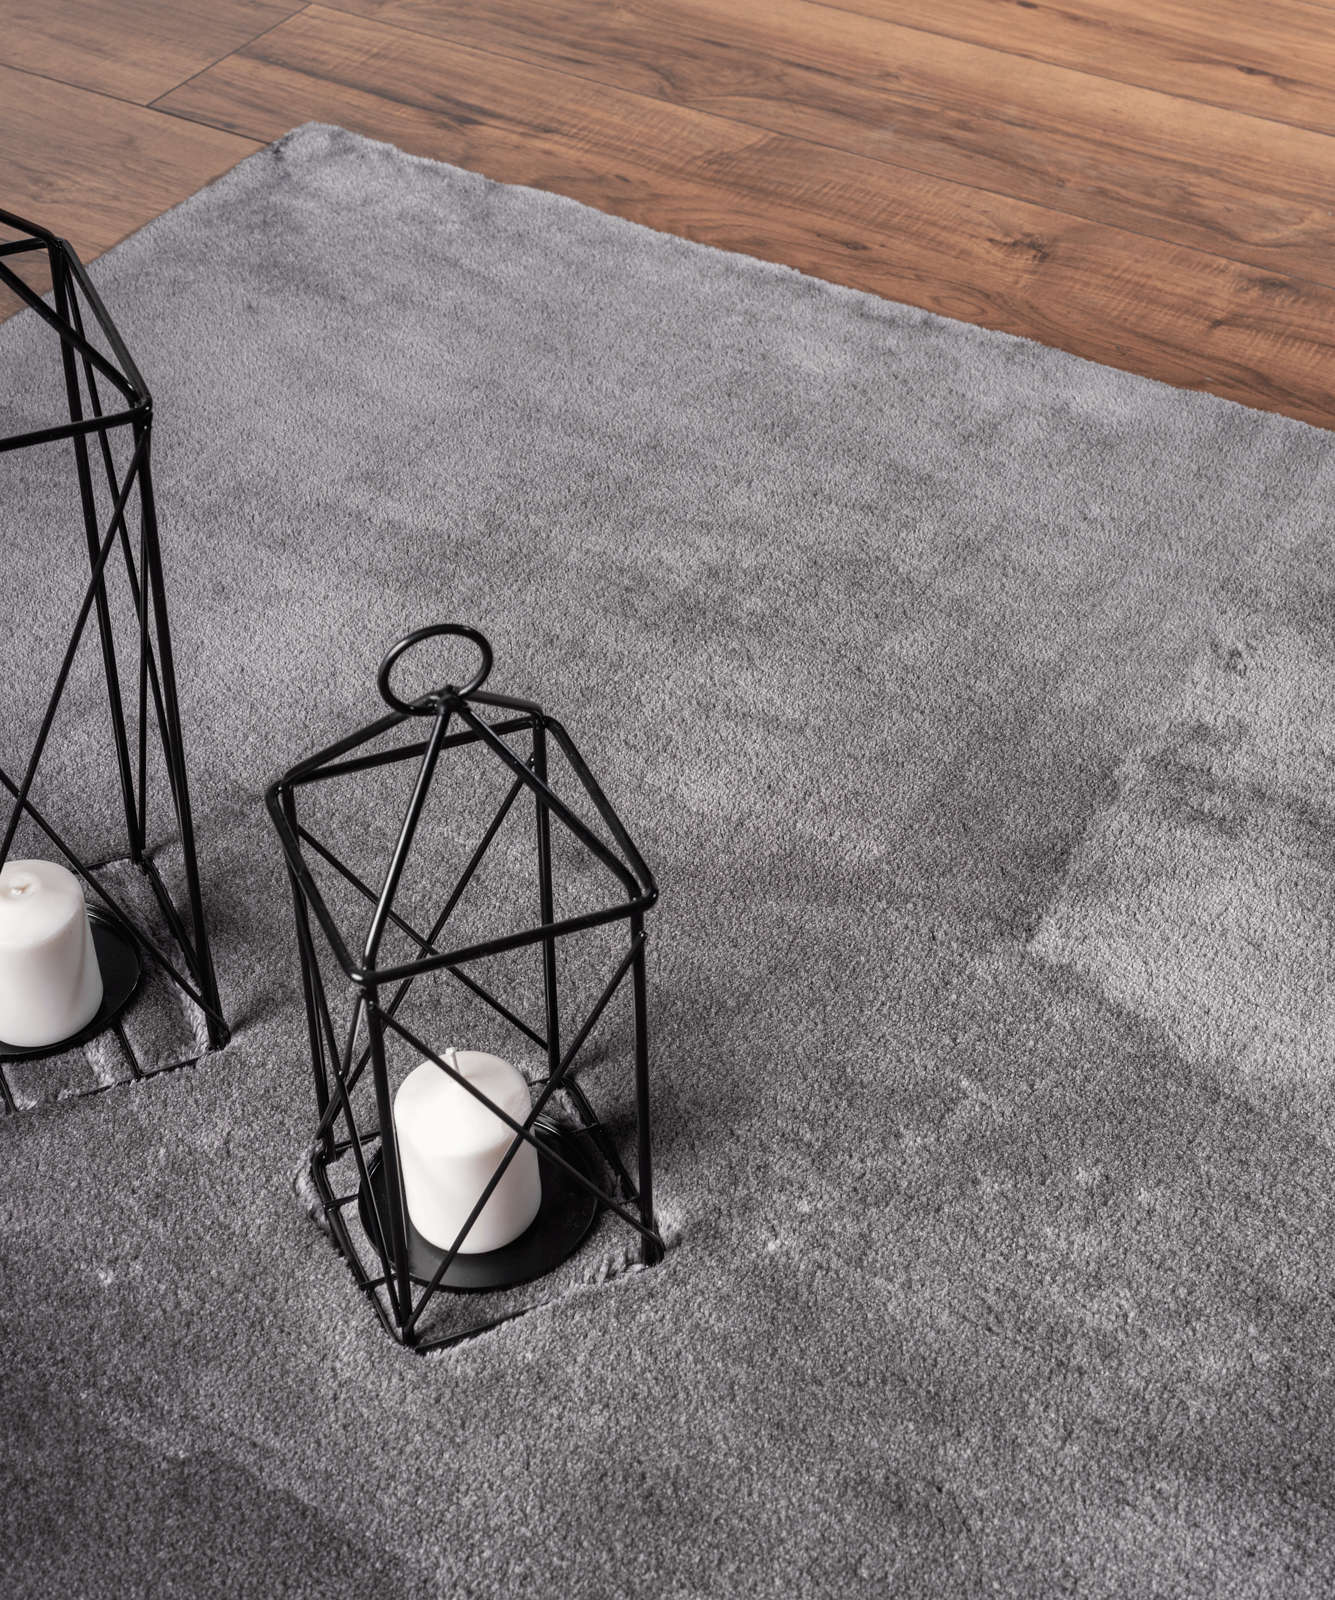             Fluffy high pile carpet in anthracite - 110 x 60 cm
        